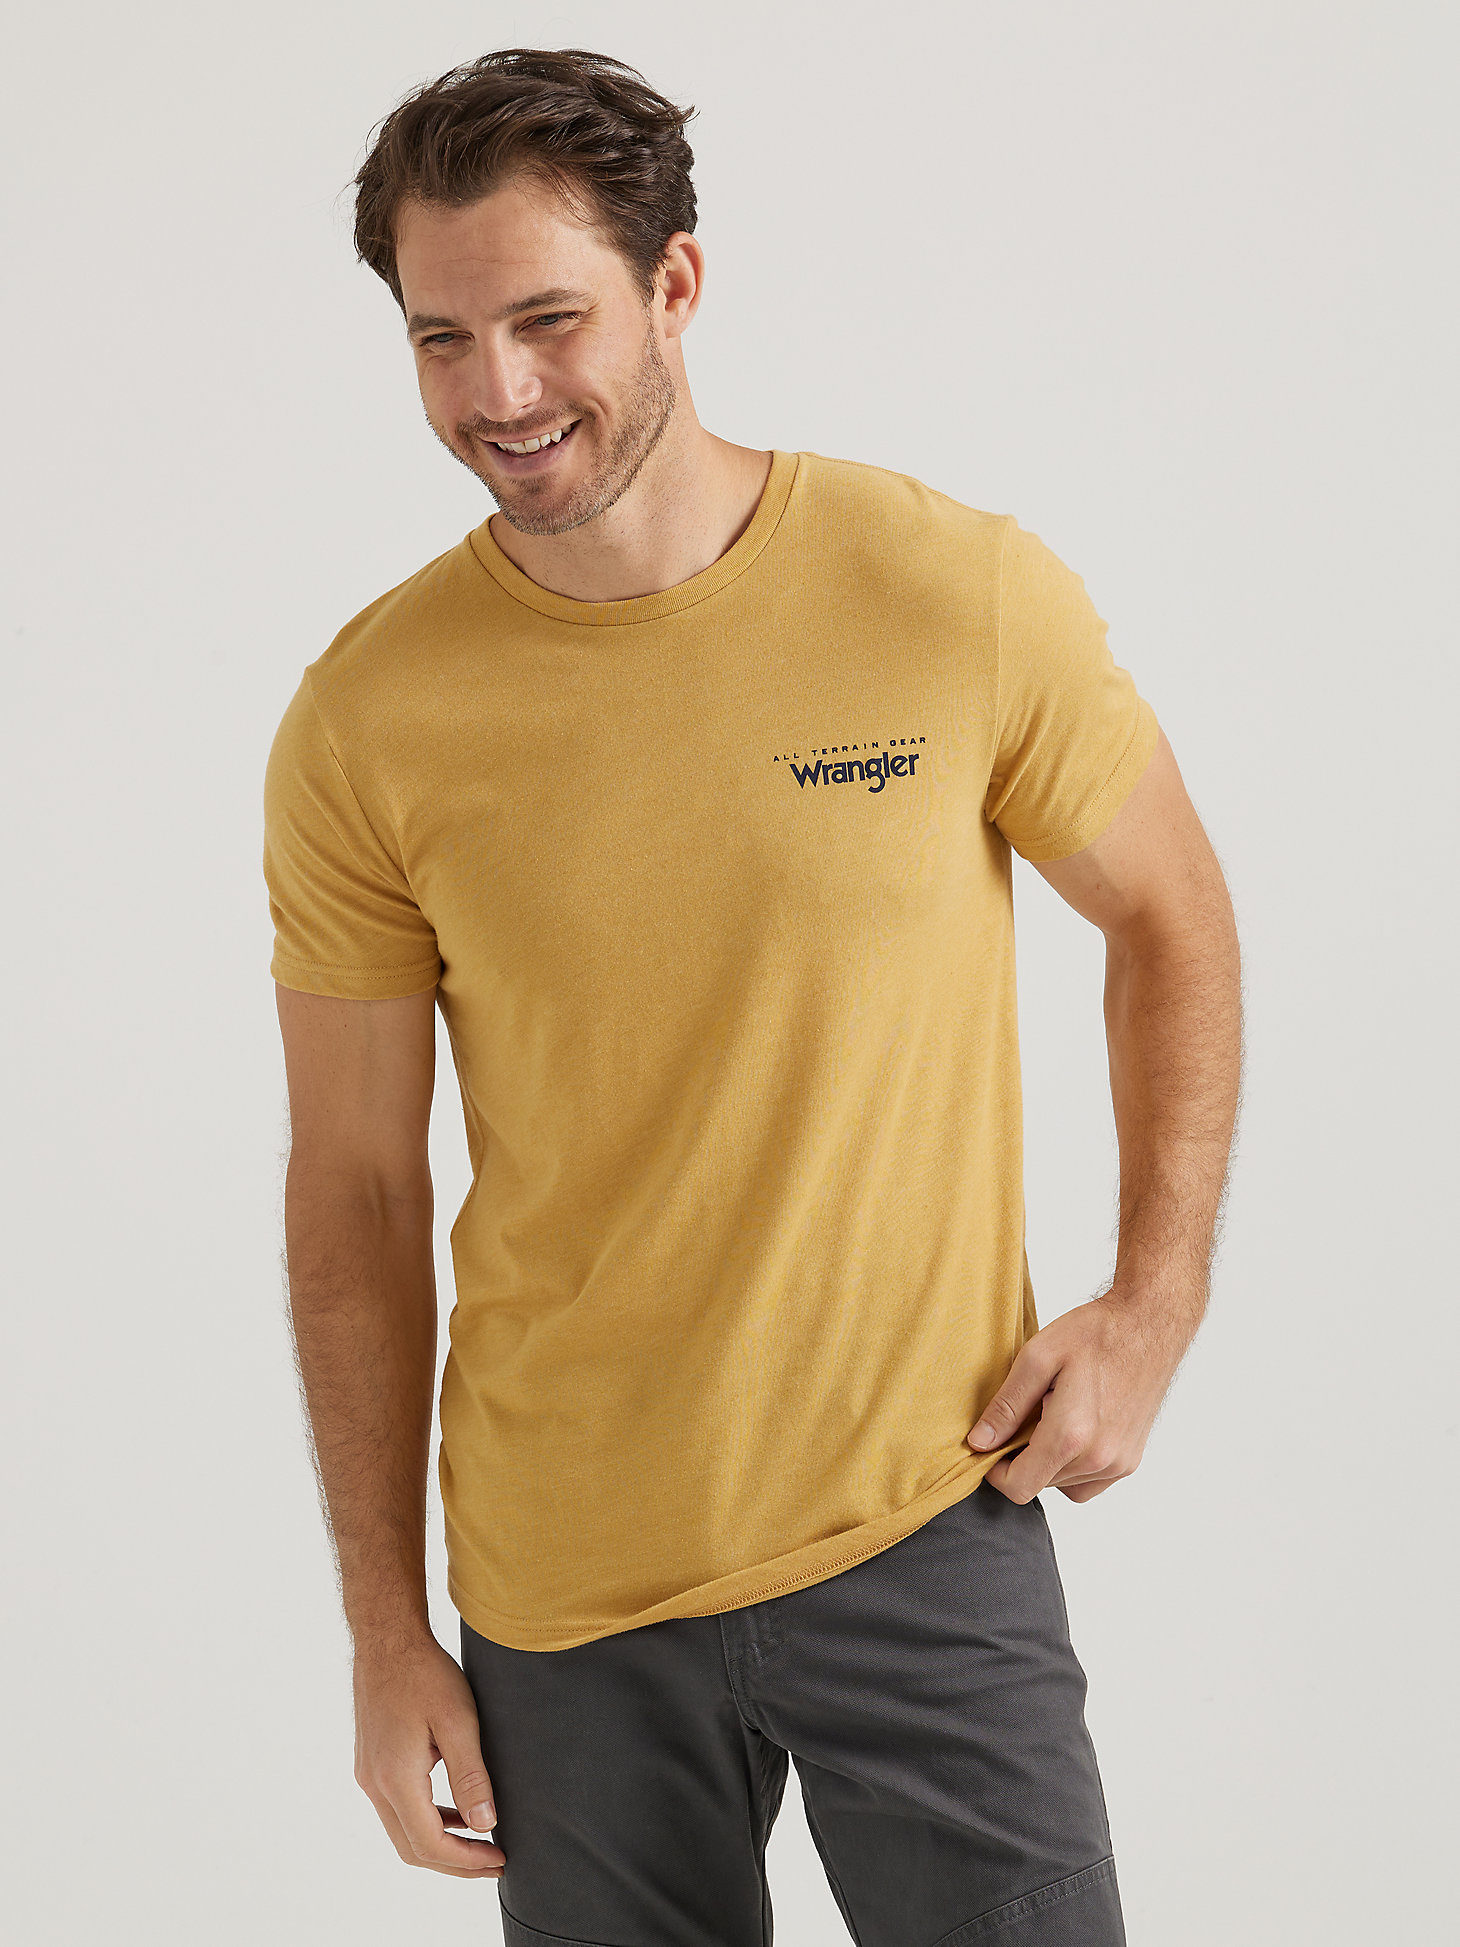 ATG By Wrangler® Men's Mountain Path T-Shirt in Pale Gold alternative view 1